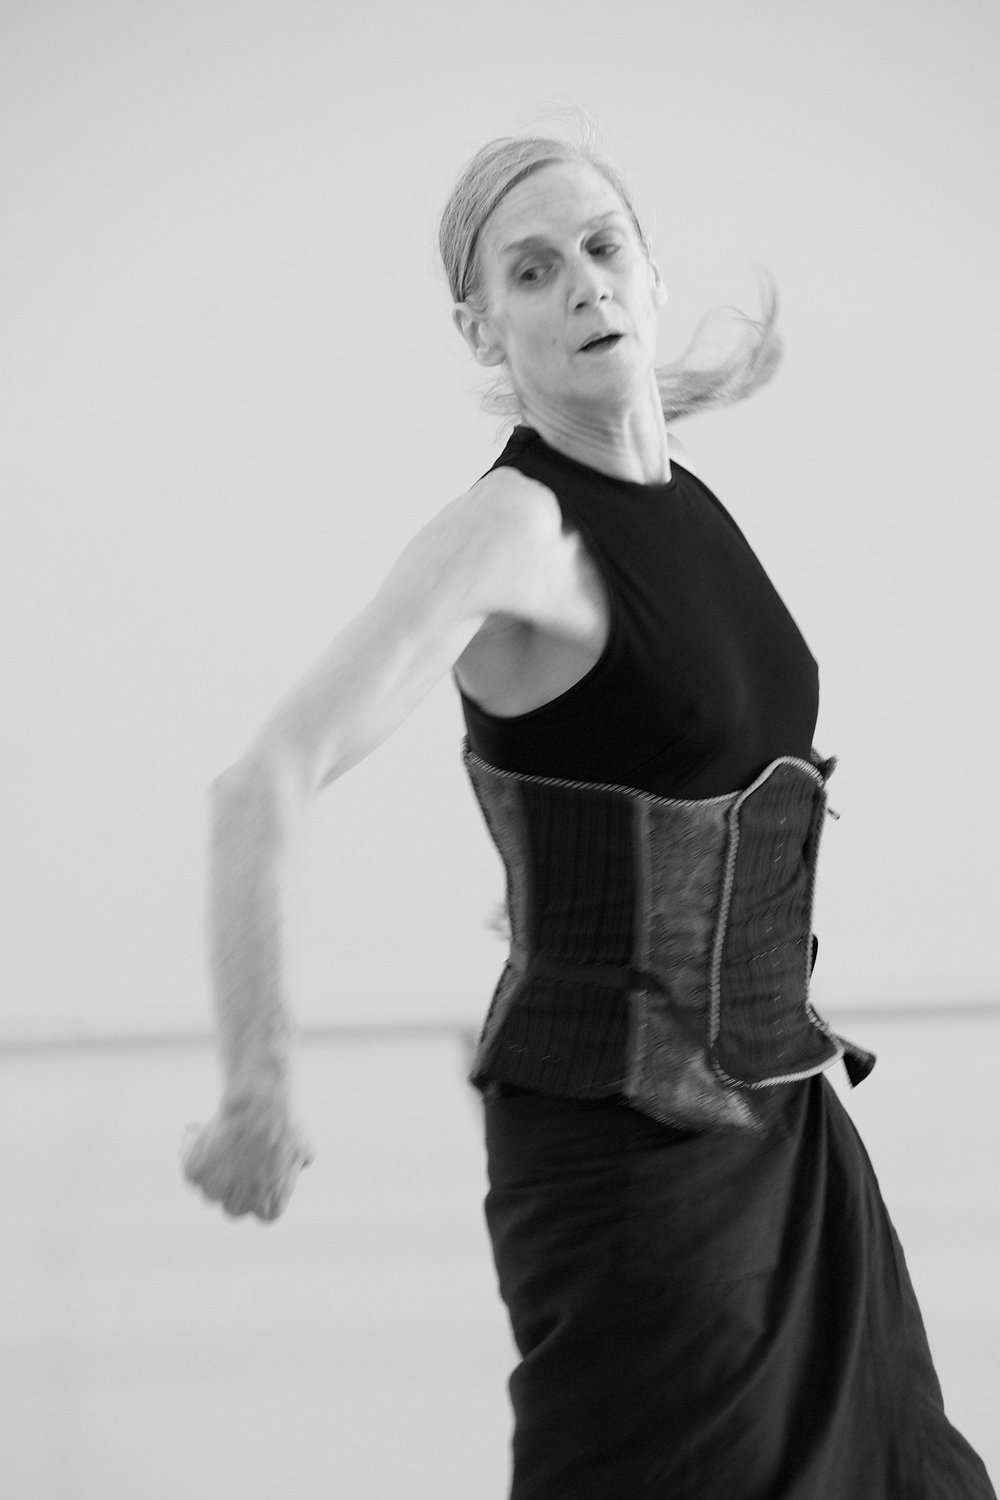  Peggy Baker, mid-movement, looking to her right as her right arm moves toward the front of her body.  